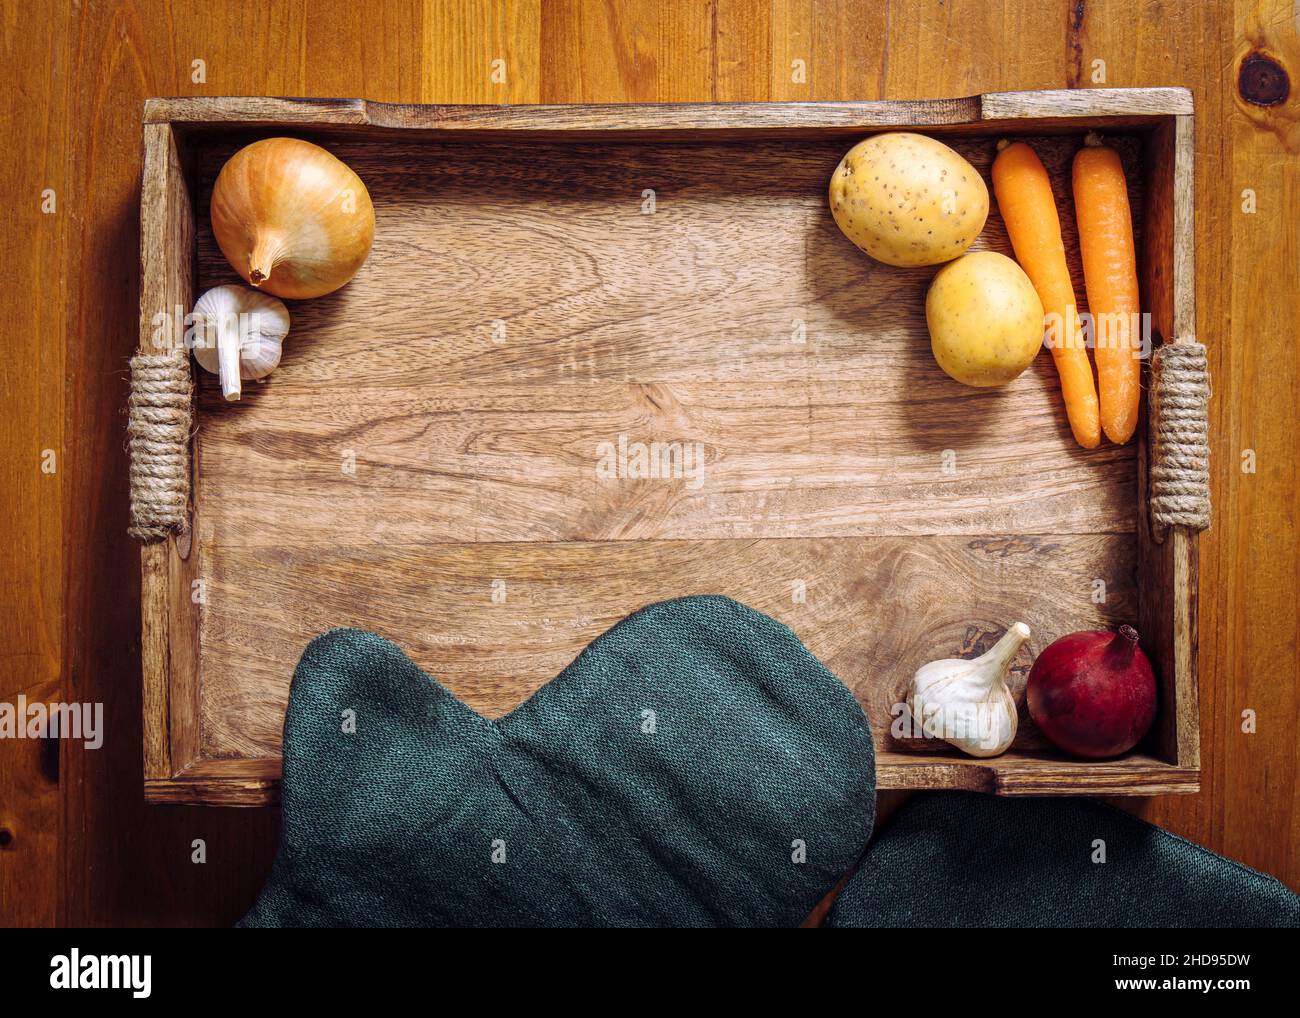 Flat lay view of various root vegetables on wooden tray on kitchen table. Lot of copy space in the center. Carrots, garlic, onion, potatoes. Stock Photo